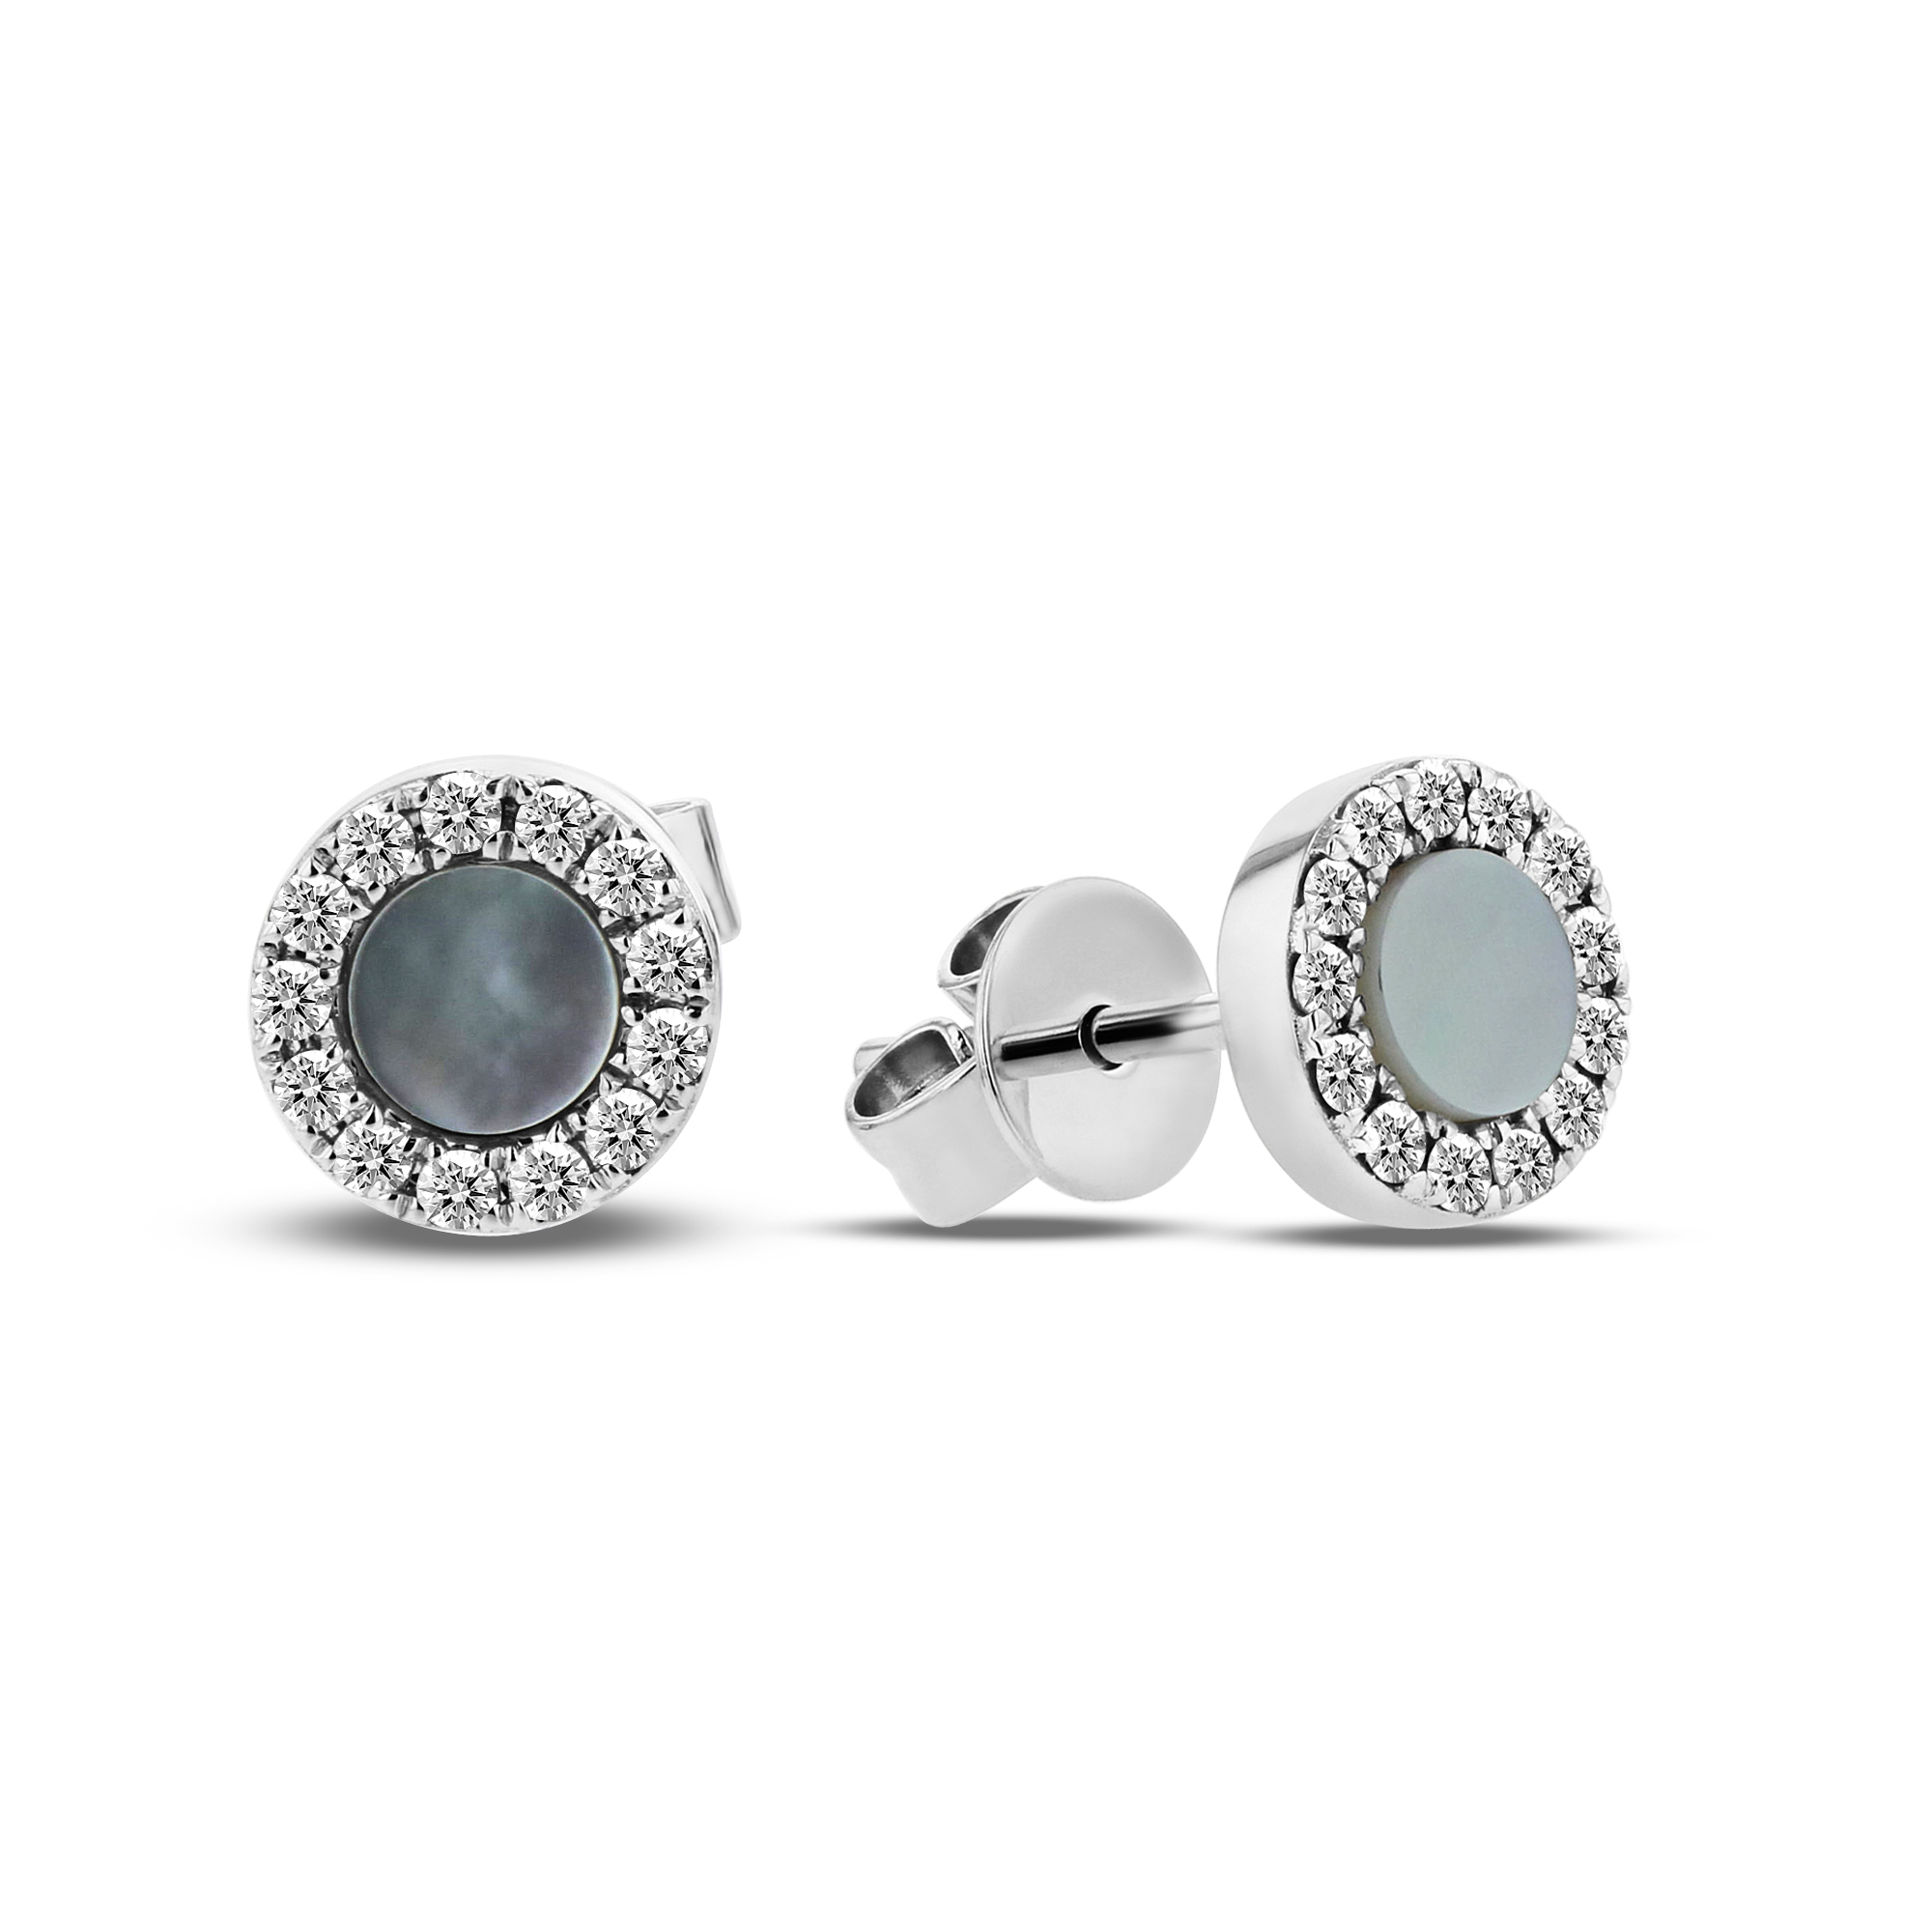 View 0.16ctw Diamond and Mother of Pearl Earrings in 14k White Gold